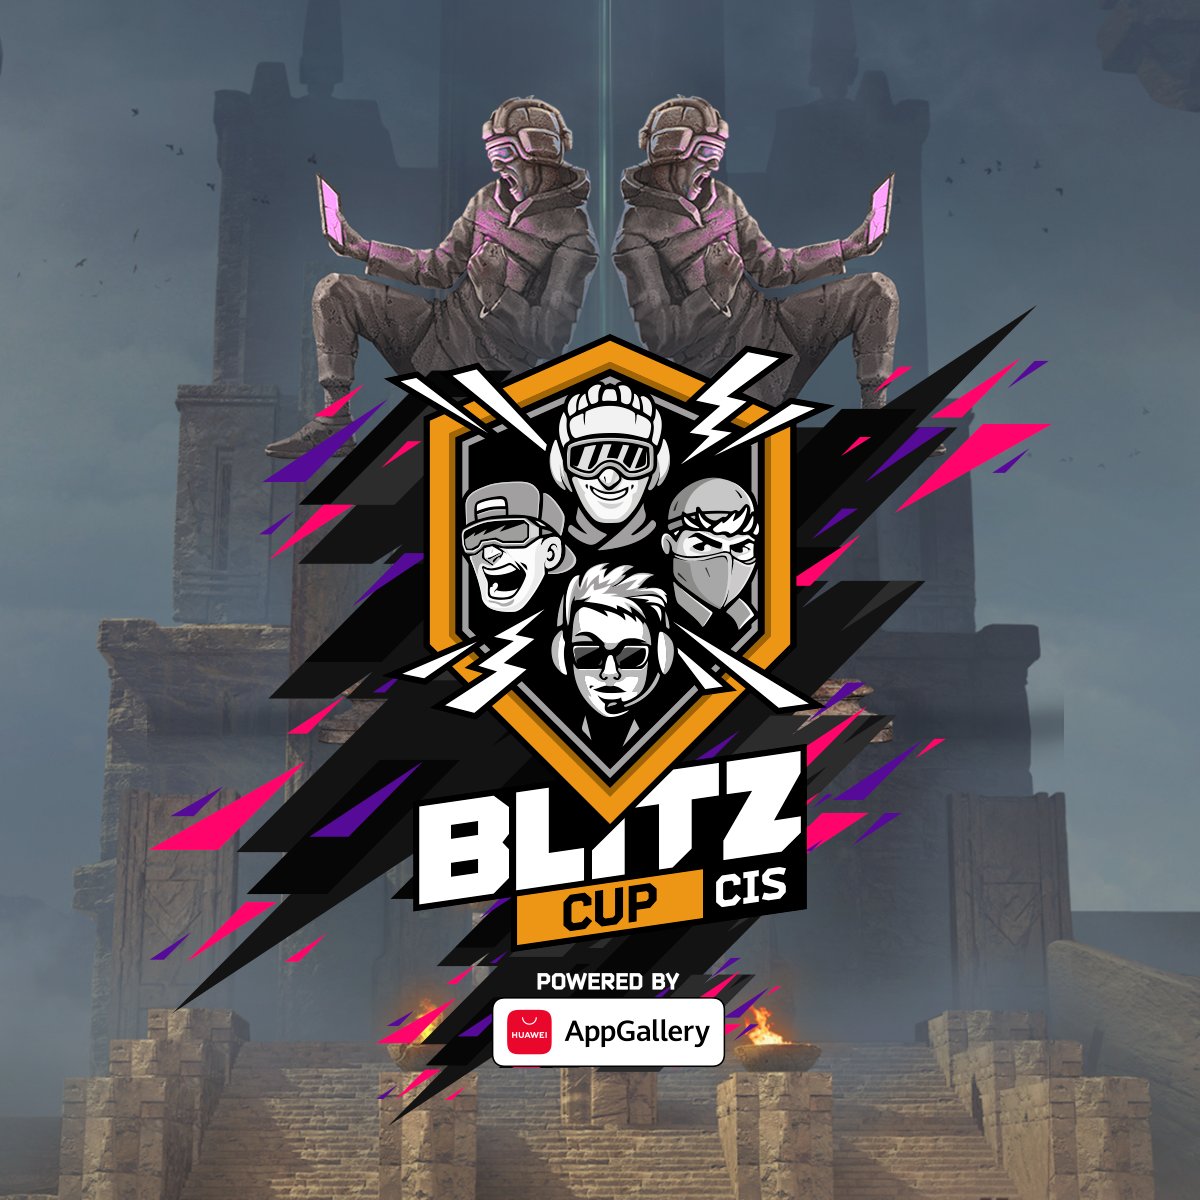 World of Tanks Blitz on Twitter: "Blitz CIS Cup powered by AppGallery  tournament starts in an hour. Today on the battlefield: [7STAR] 7STAR vs  [C4] C4 [GGAME] GUCCI GANG TEAM vs [MERCY]